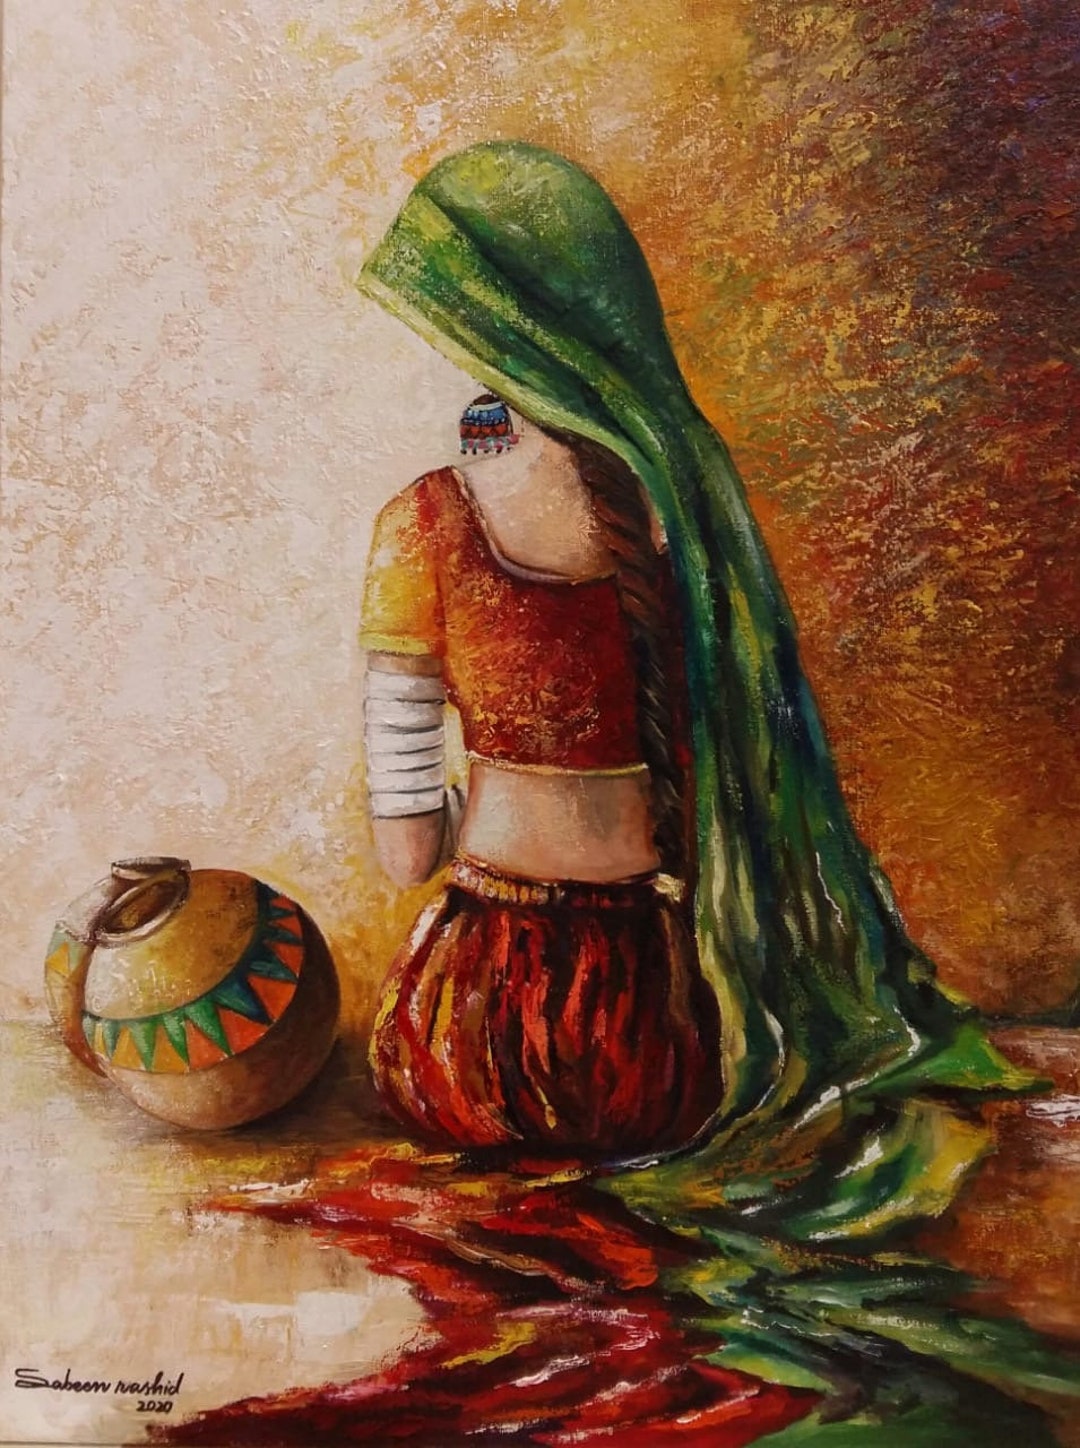 South Asian Woman Handmade Oil Painting